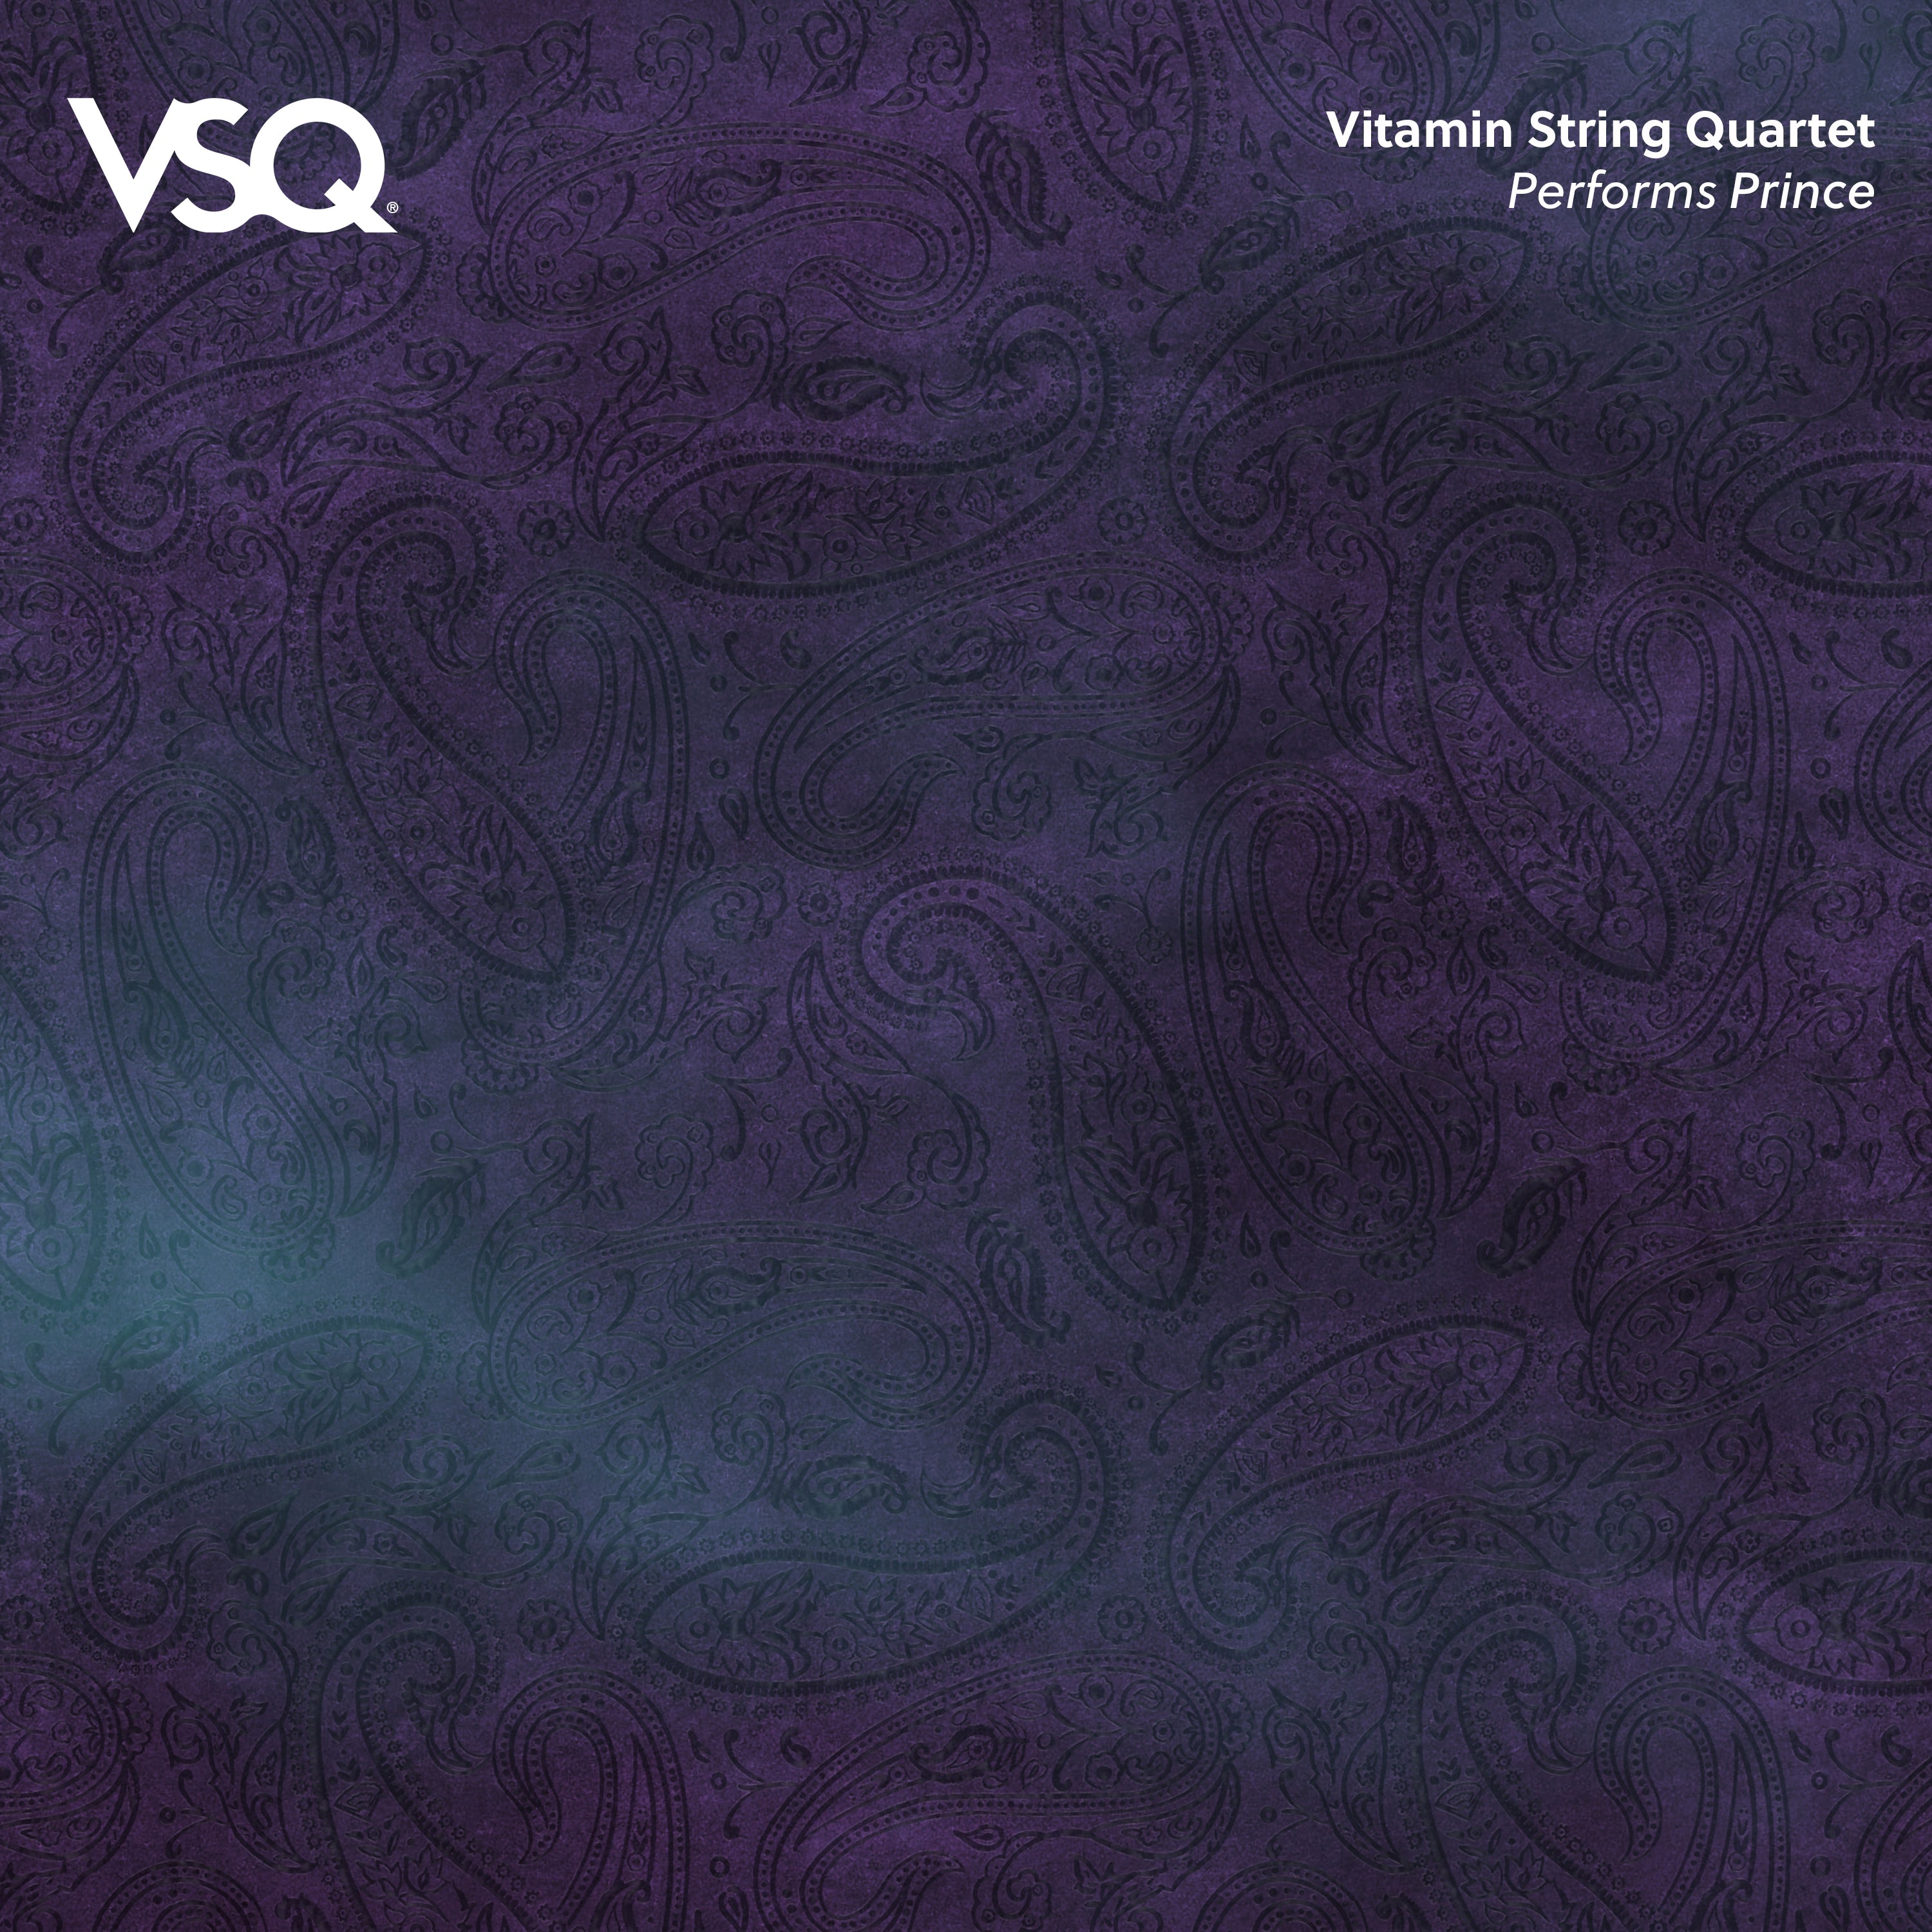 prince instrumental covers from vitamin string quartet